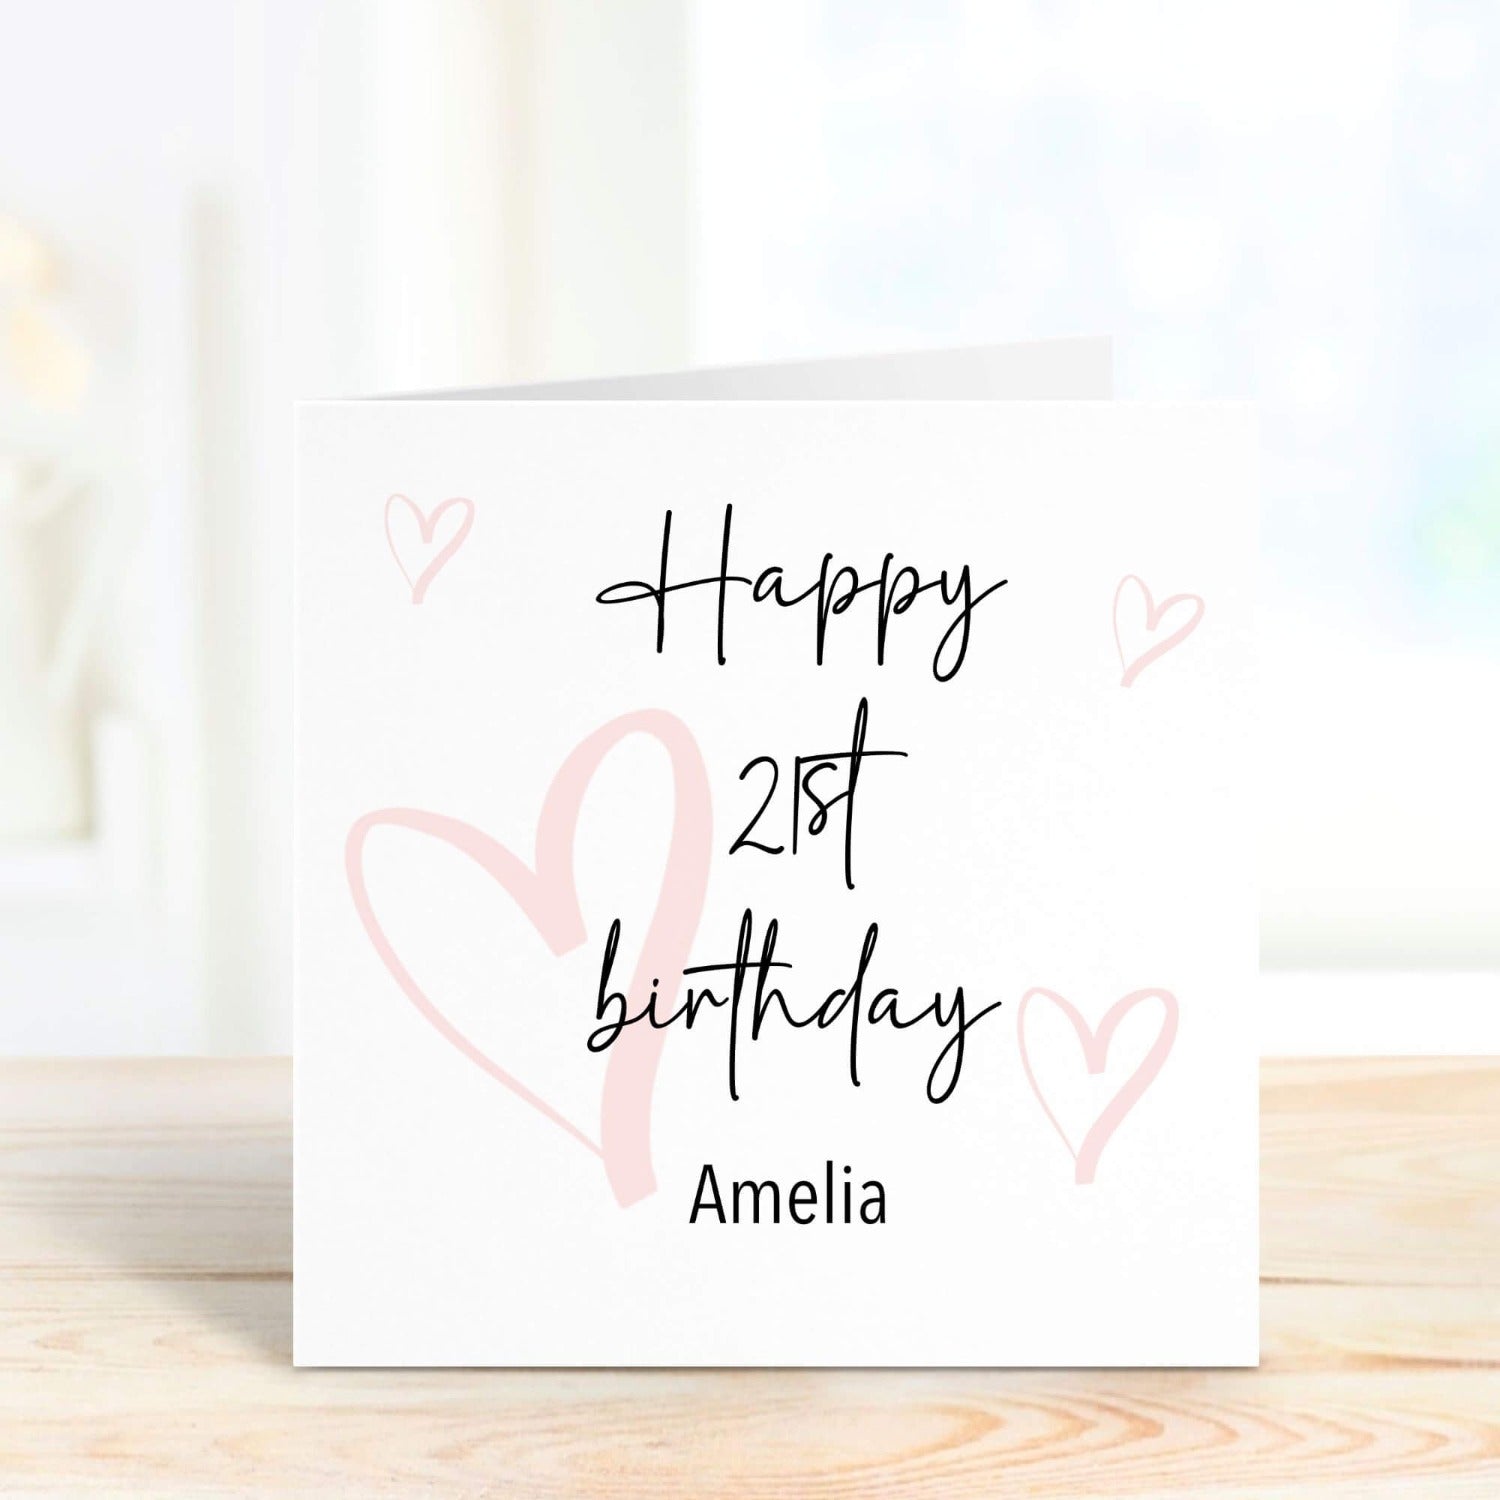 21st birthday personalised card with name and message